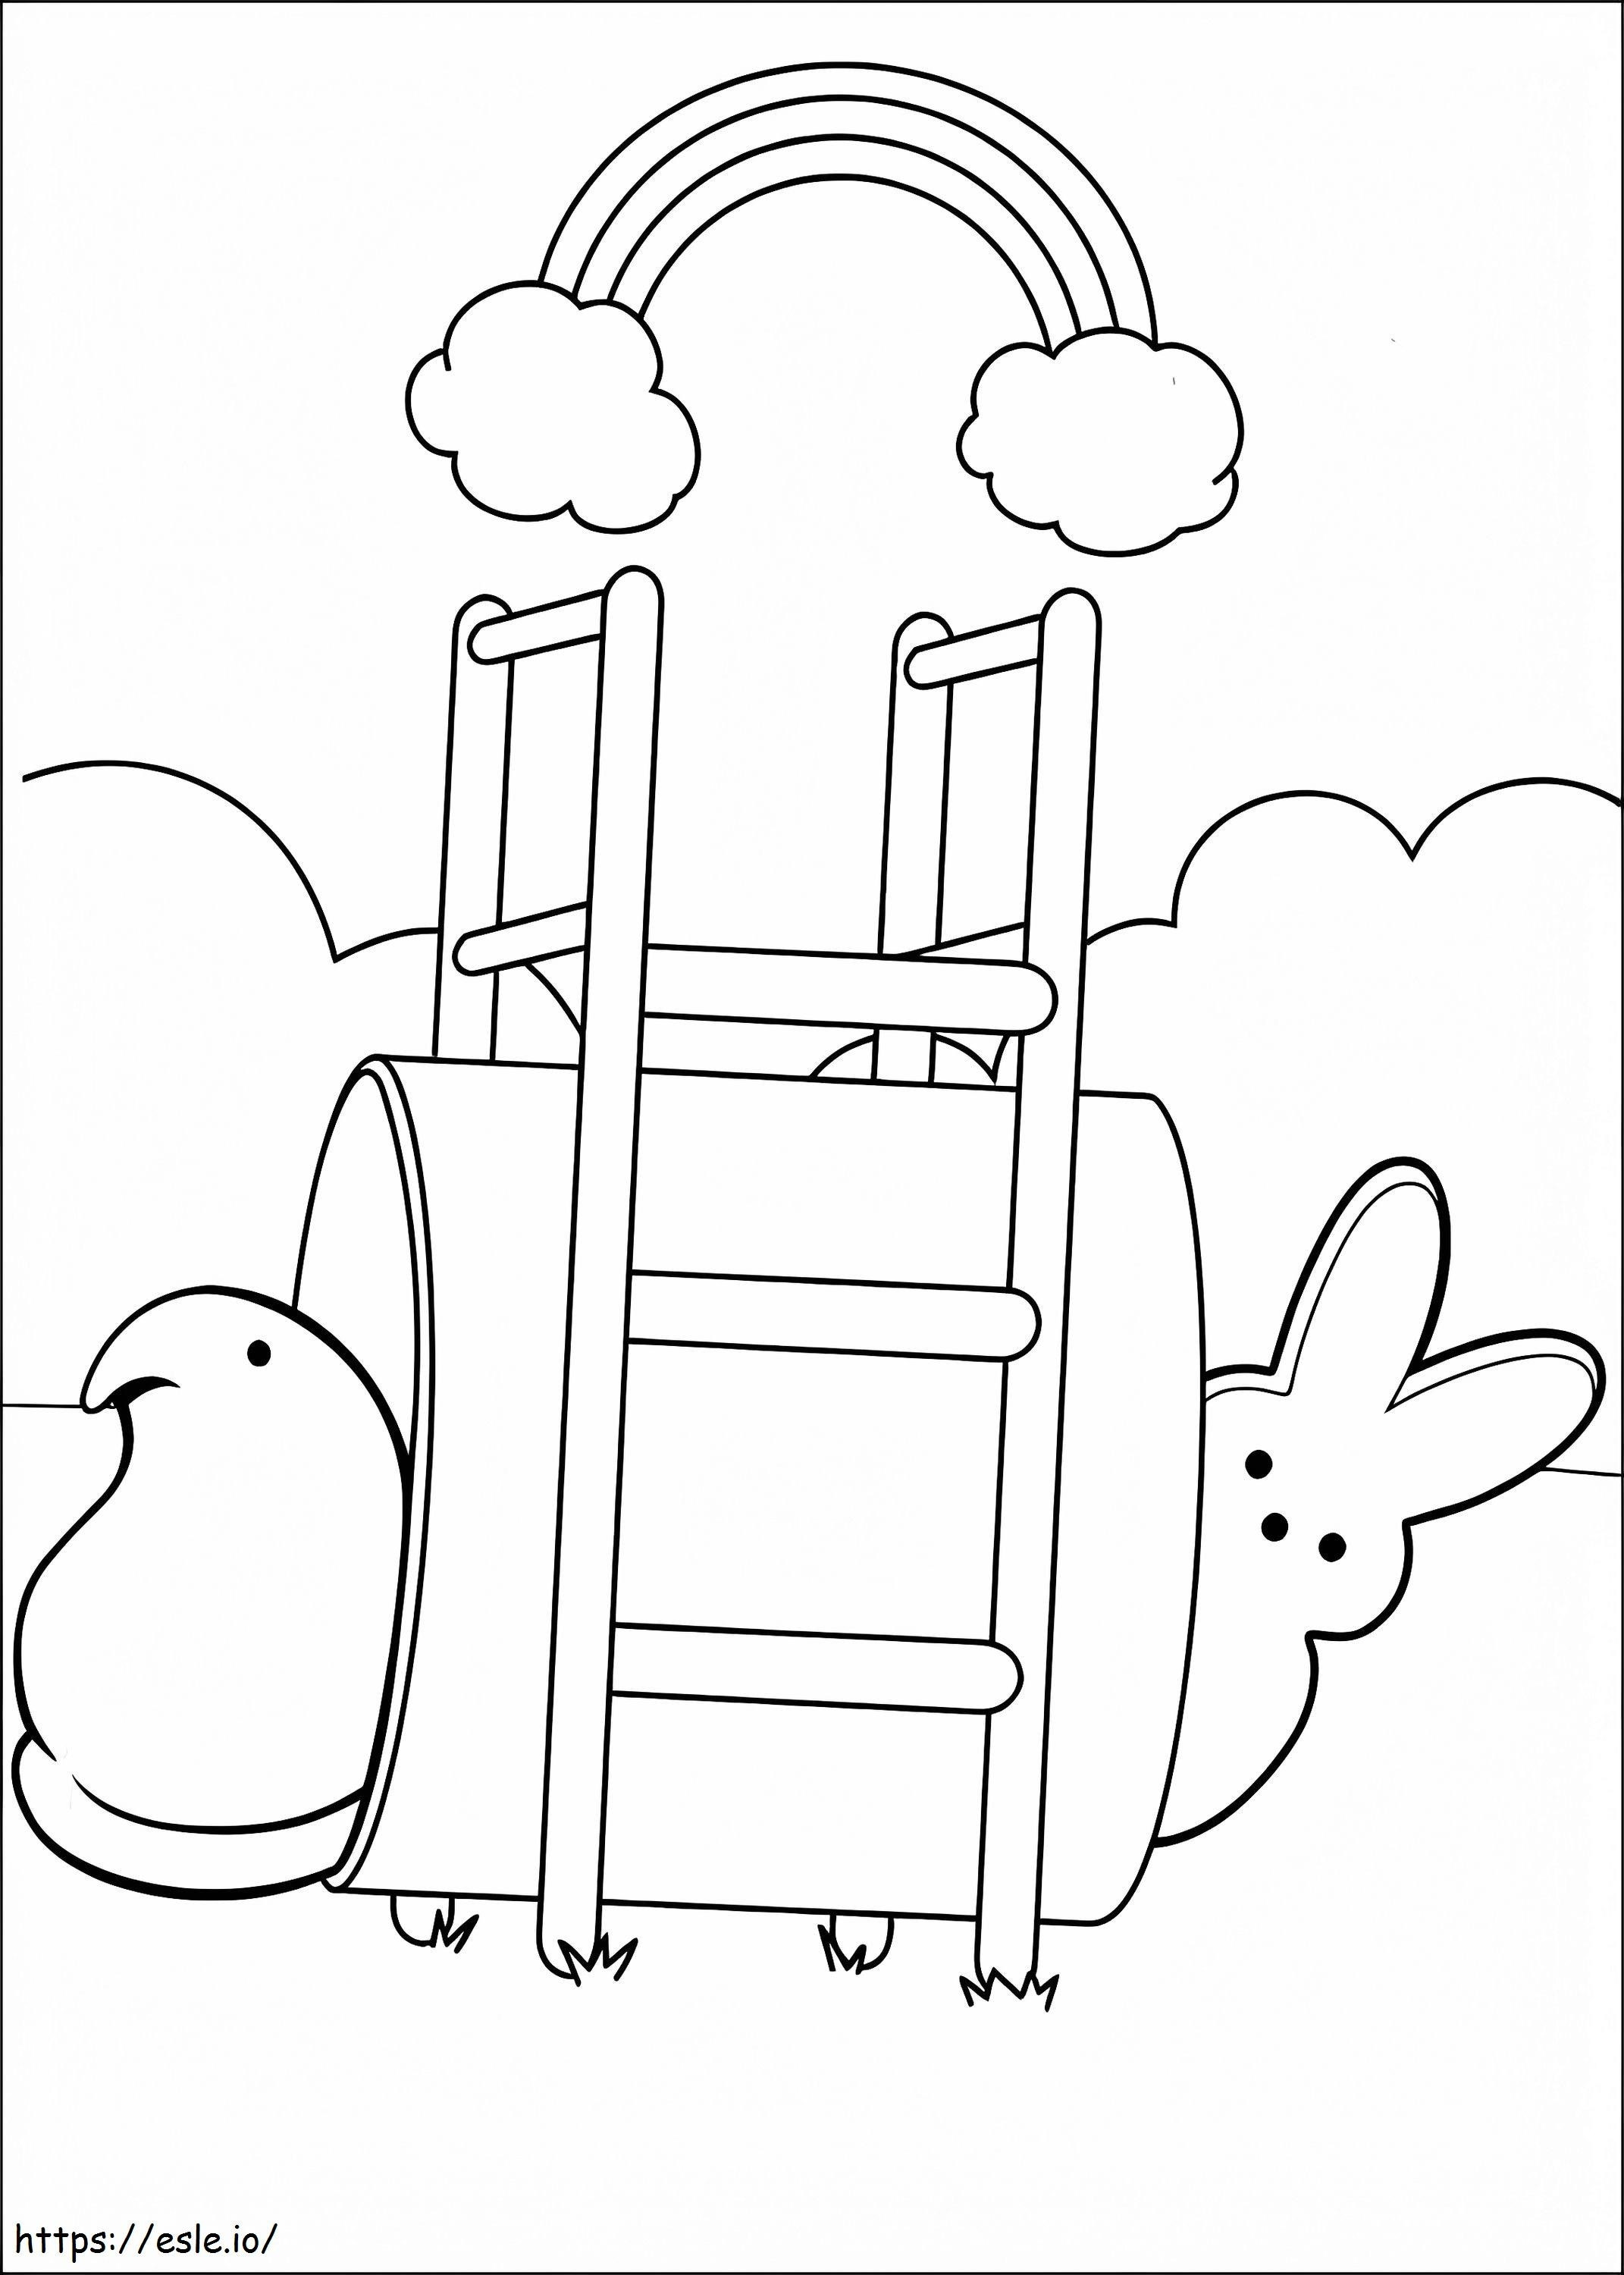 Marshmallow Peeps 4 coloring page